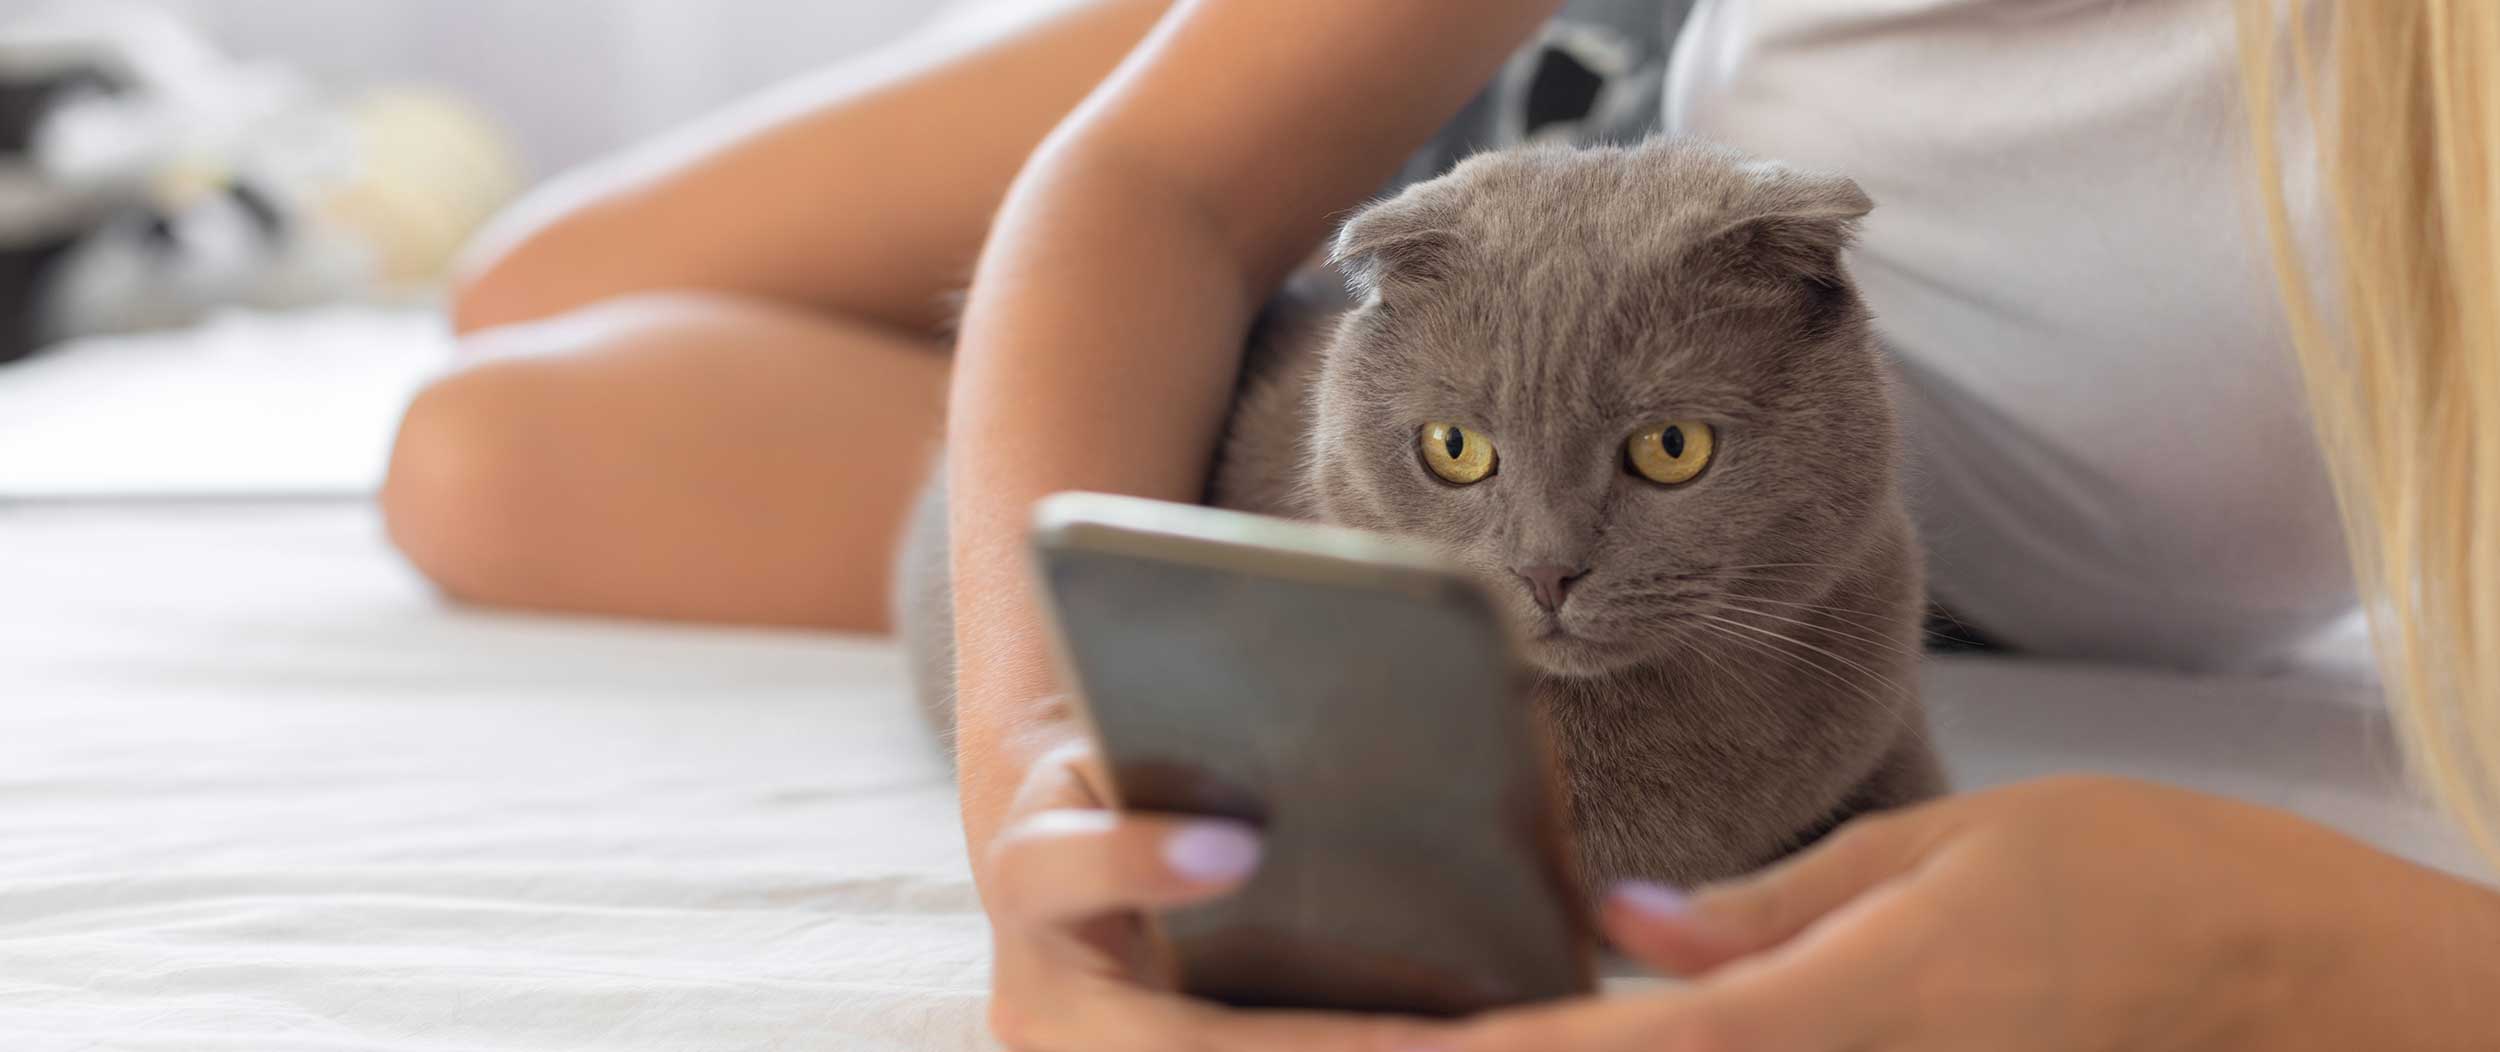 A woman with her cat looking at a phone